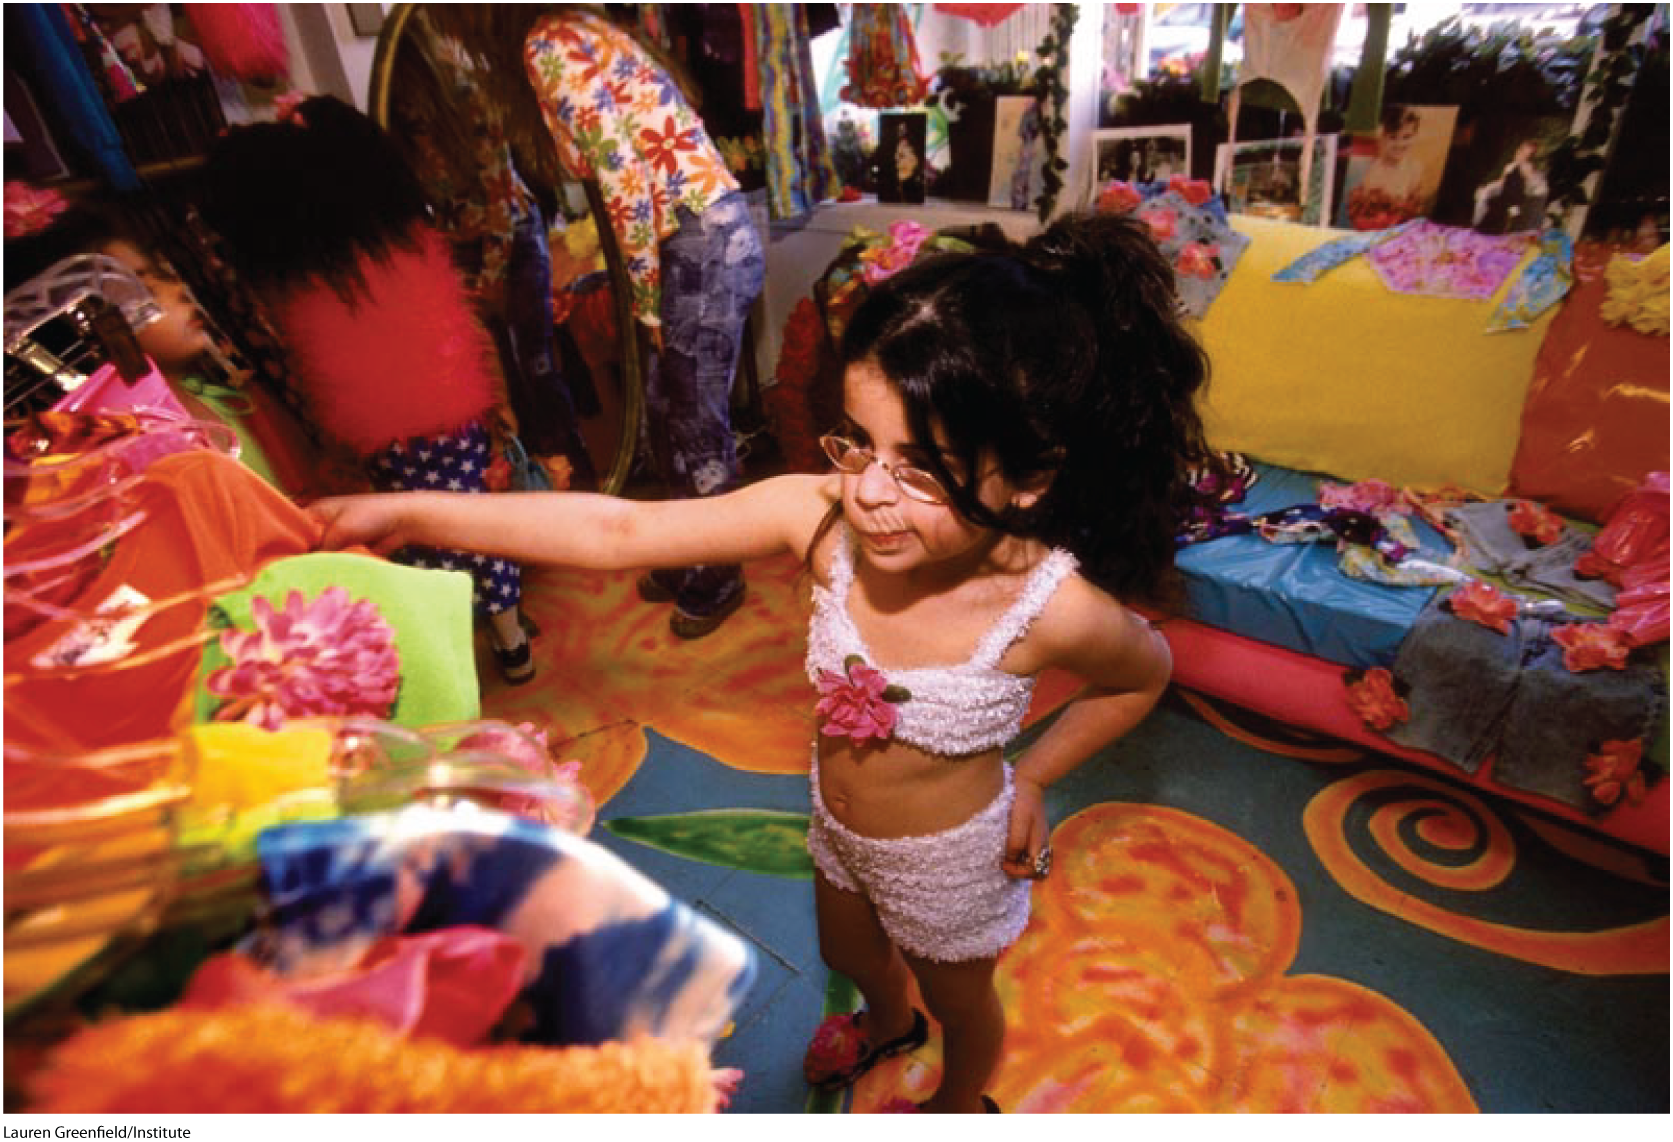 A photo shows a small girl choosing a dress from a colorful wardrobe.